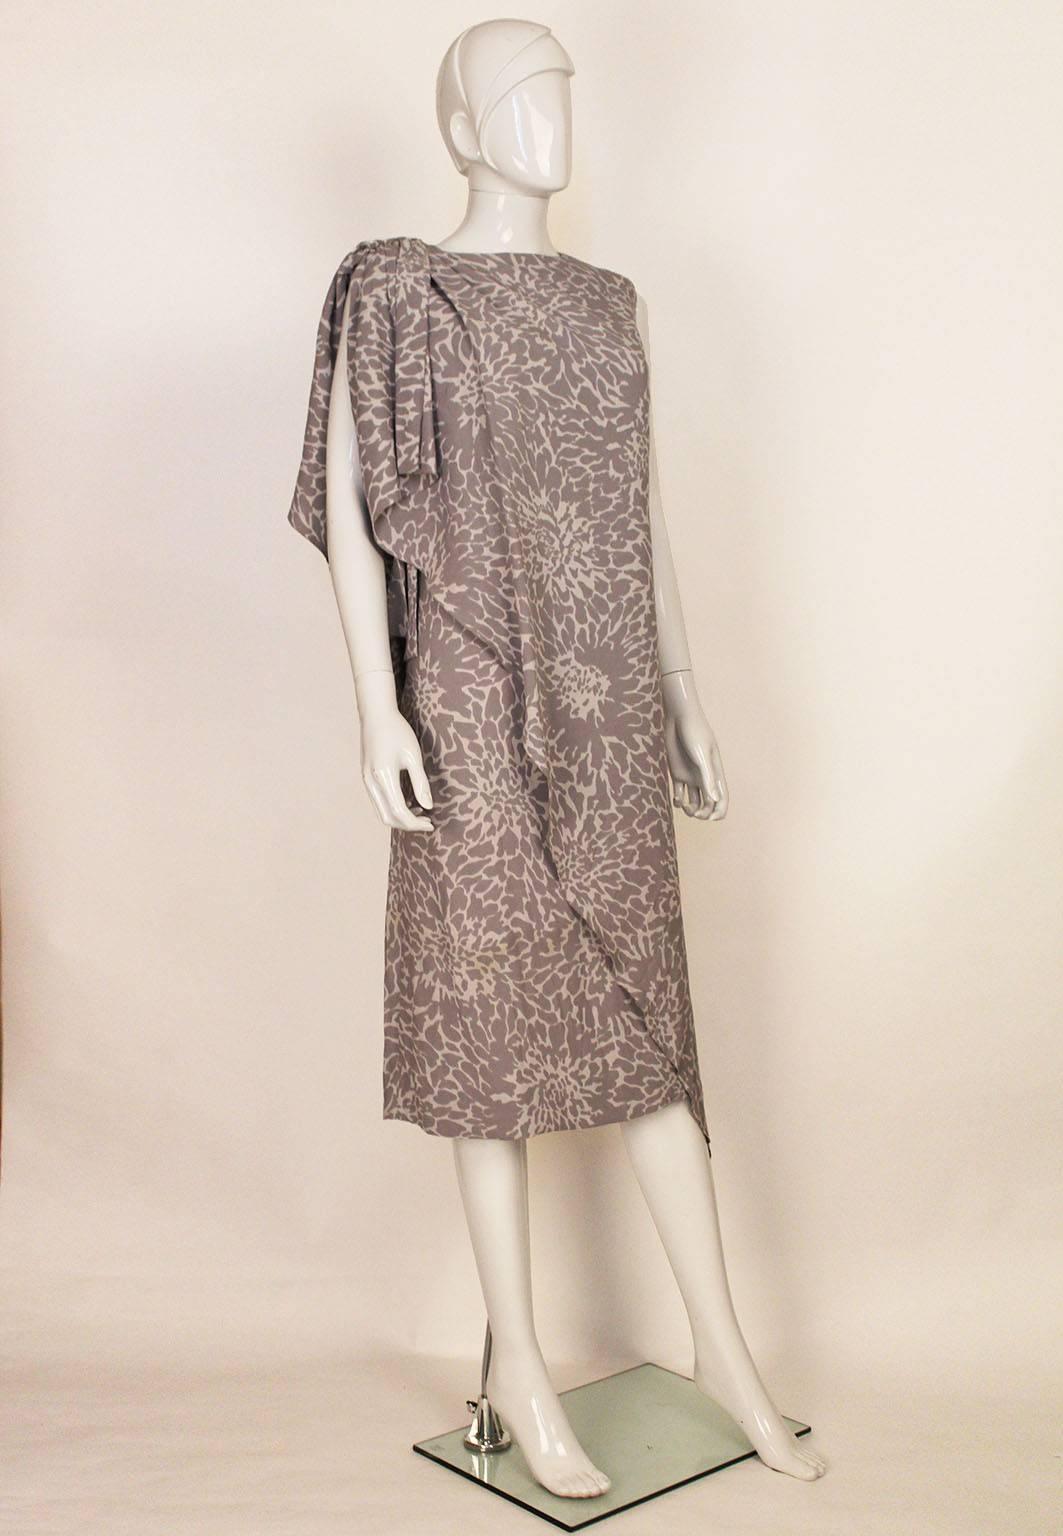 An elegant gown by Pierre Balmain,in a pretty grey and white print. The dress is sleeveless and has an interesting diagonal drape on the front and back.In addition the dress has a small waterfall drape on the shoulder.There is a back zip opening.